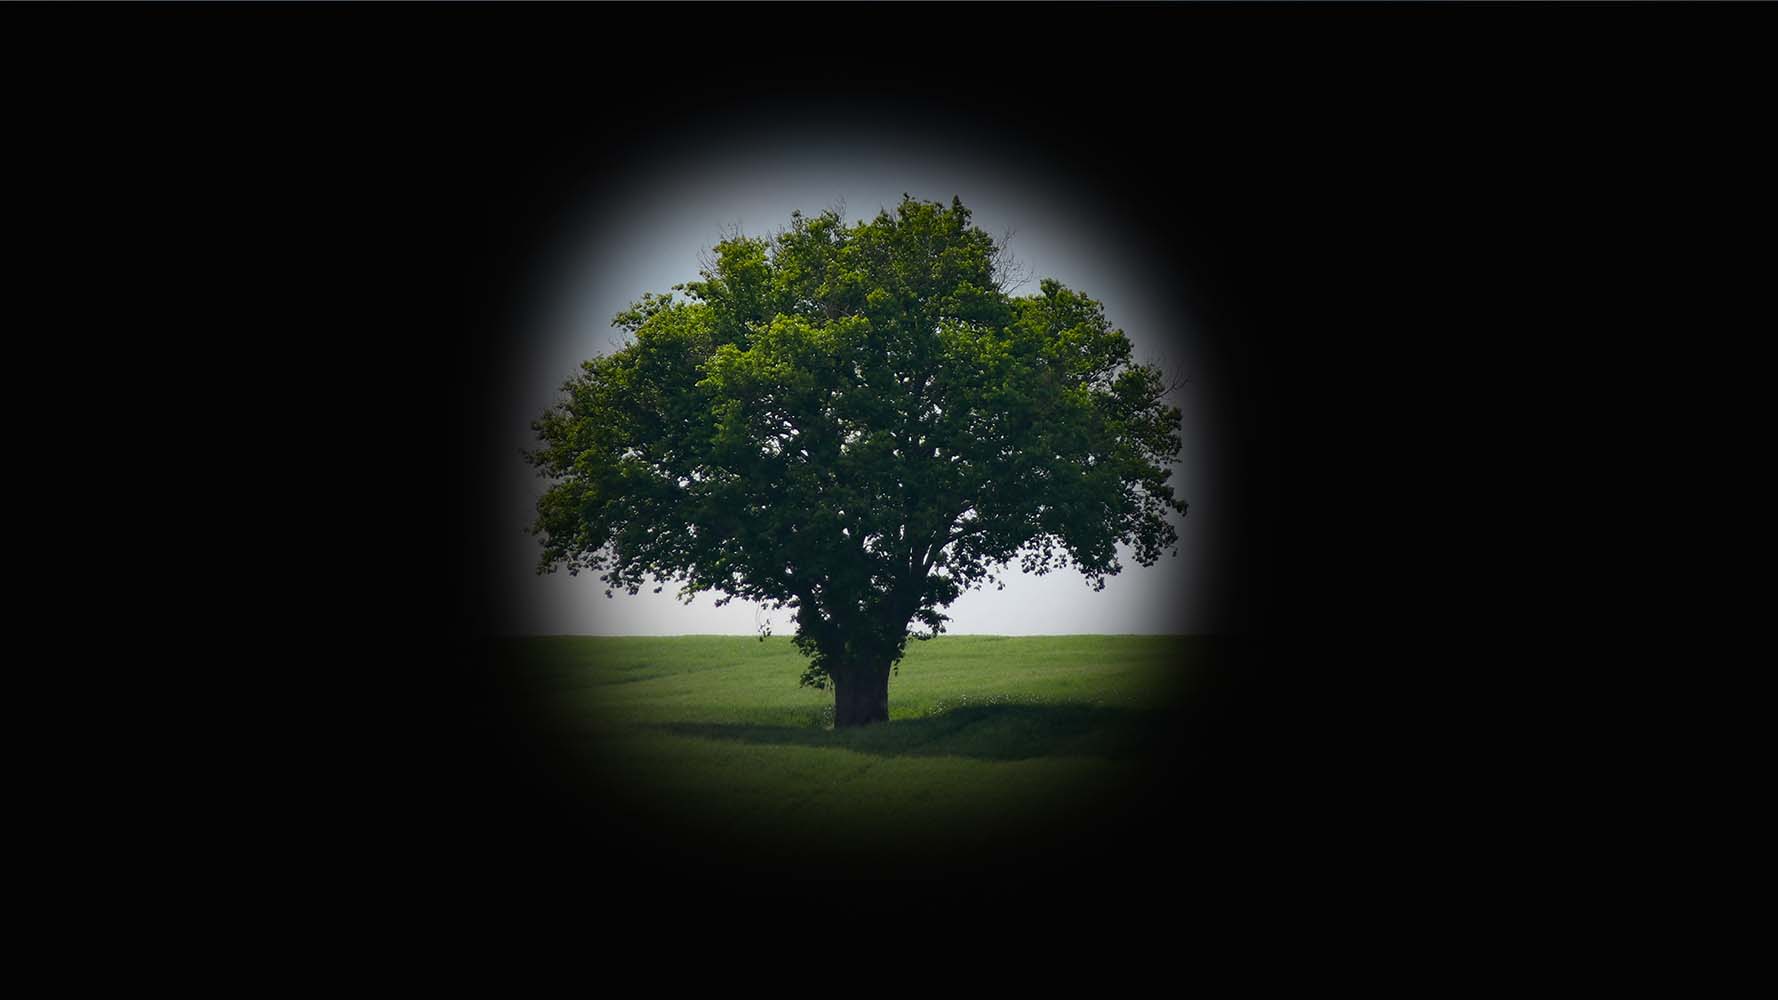 Image of a tree surrounded by a black, blurred shape to represent how someone with glaucoma may experience the scene.